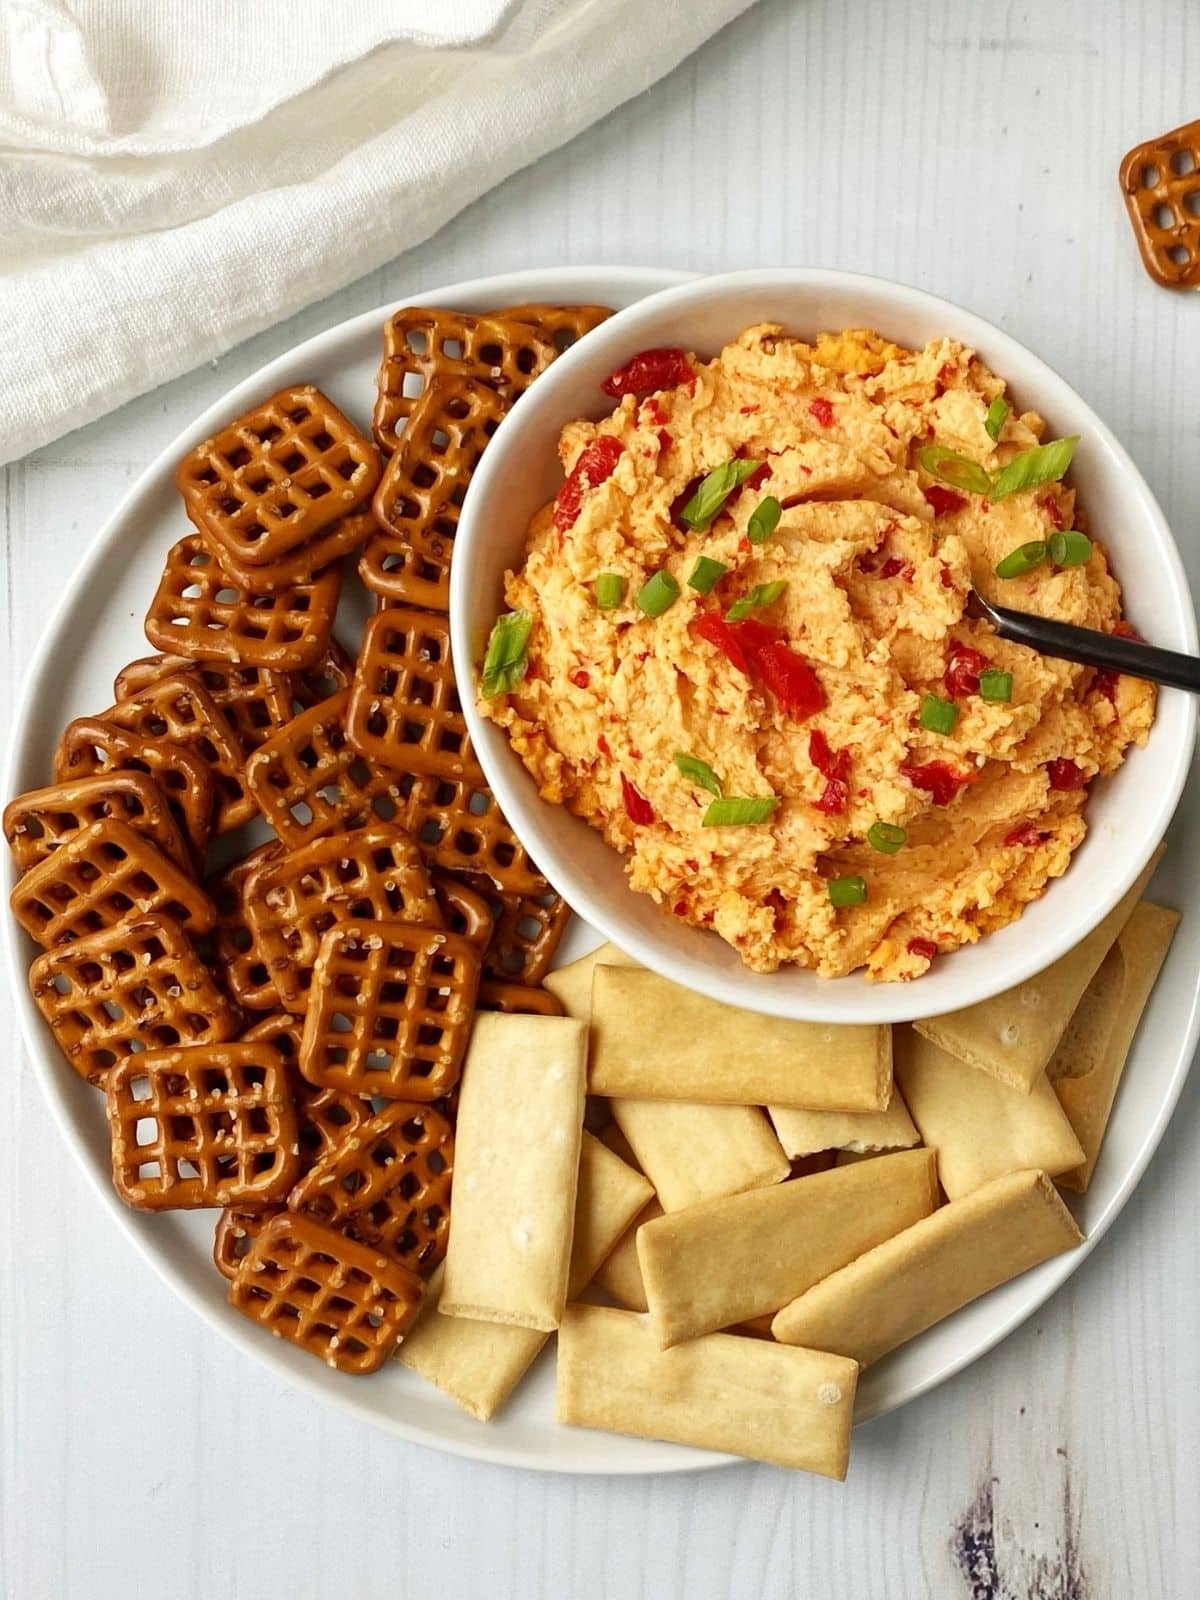 bowl of cheese spread on a plate with pretzels and crackers